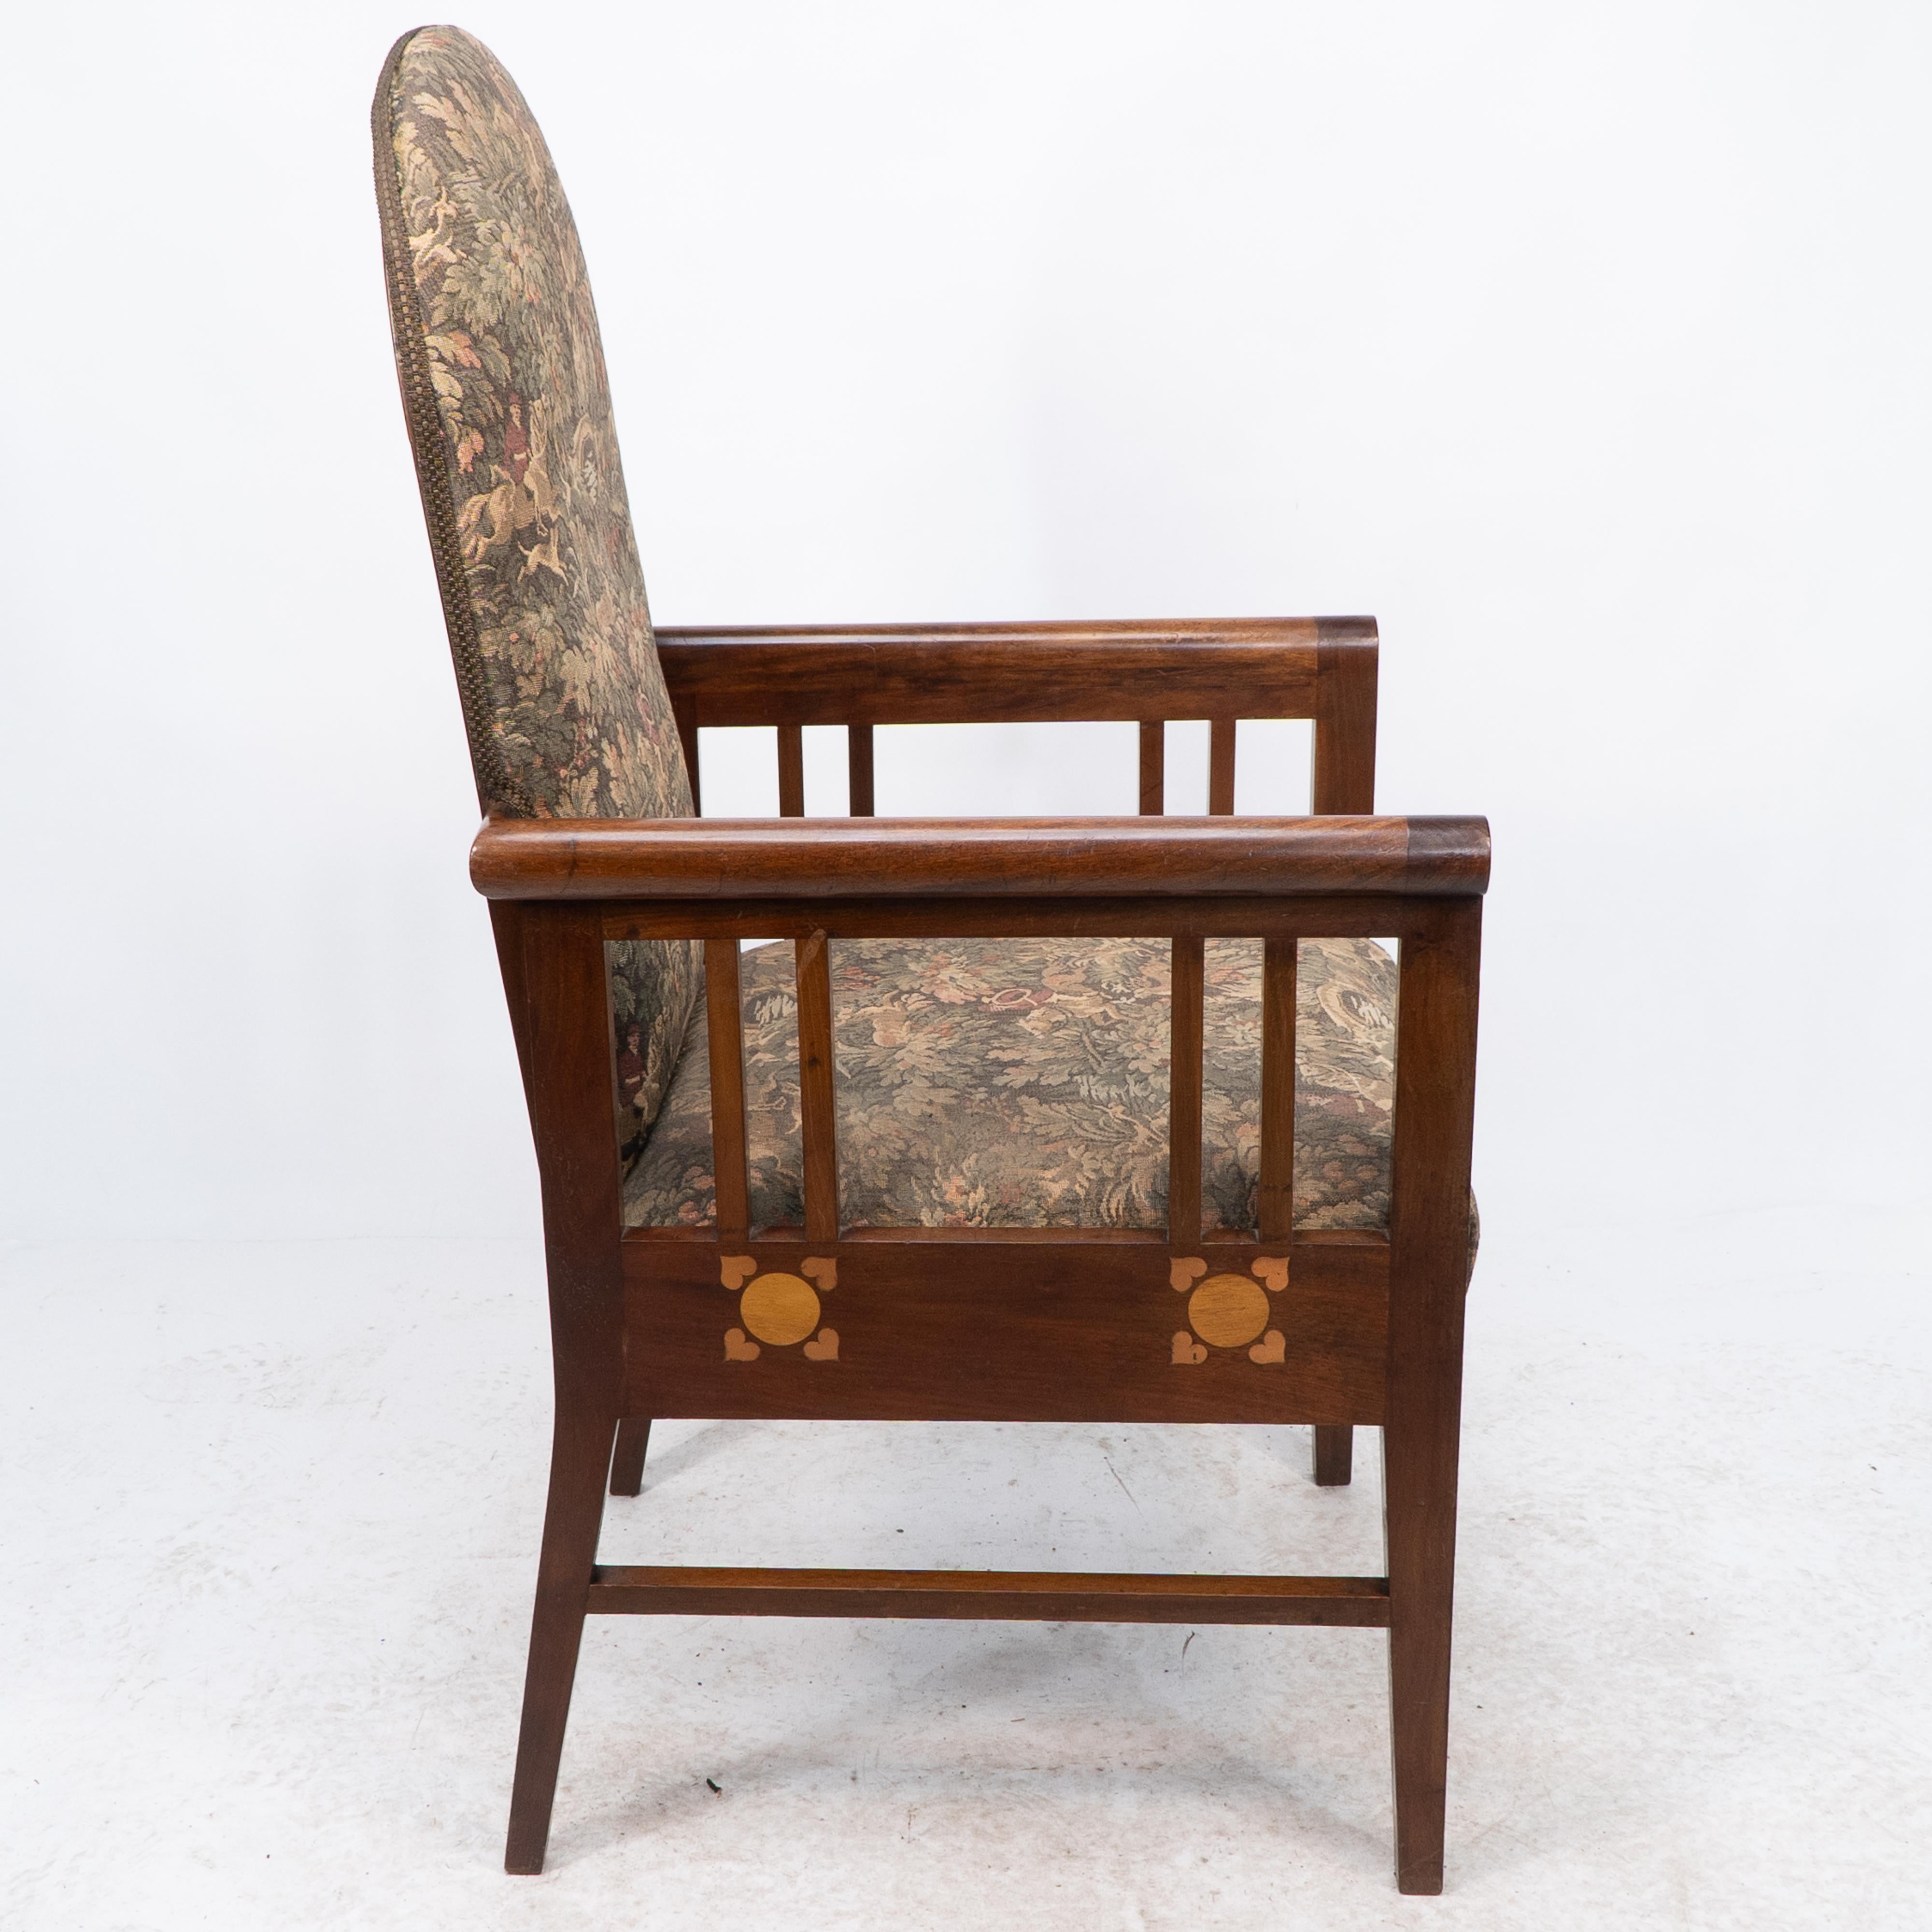 G M Ellwood for J S Henry. A Progressive New Art armchair with fruitwood inlays In Good Condition For Sale In London, GB